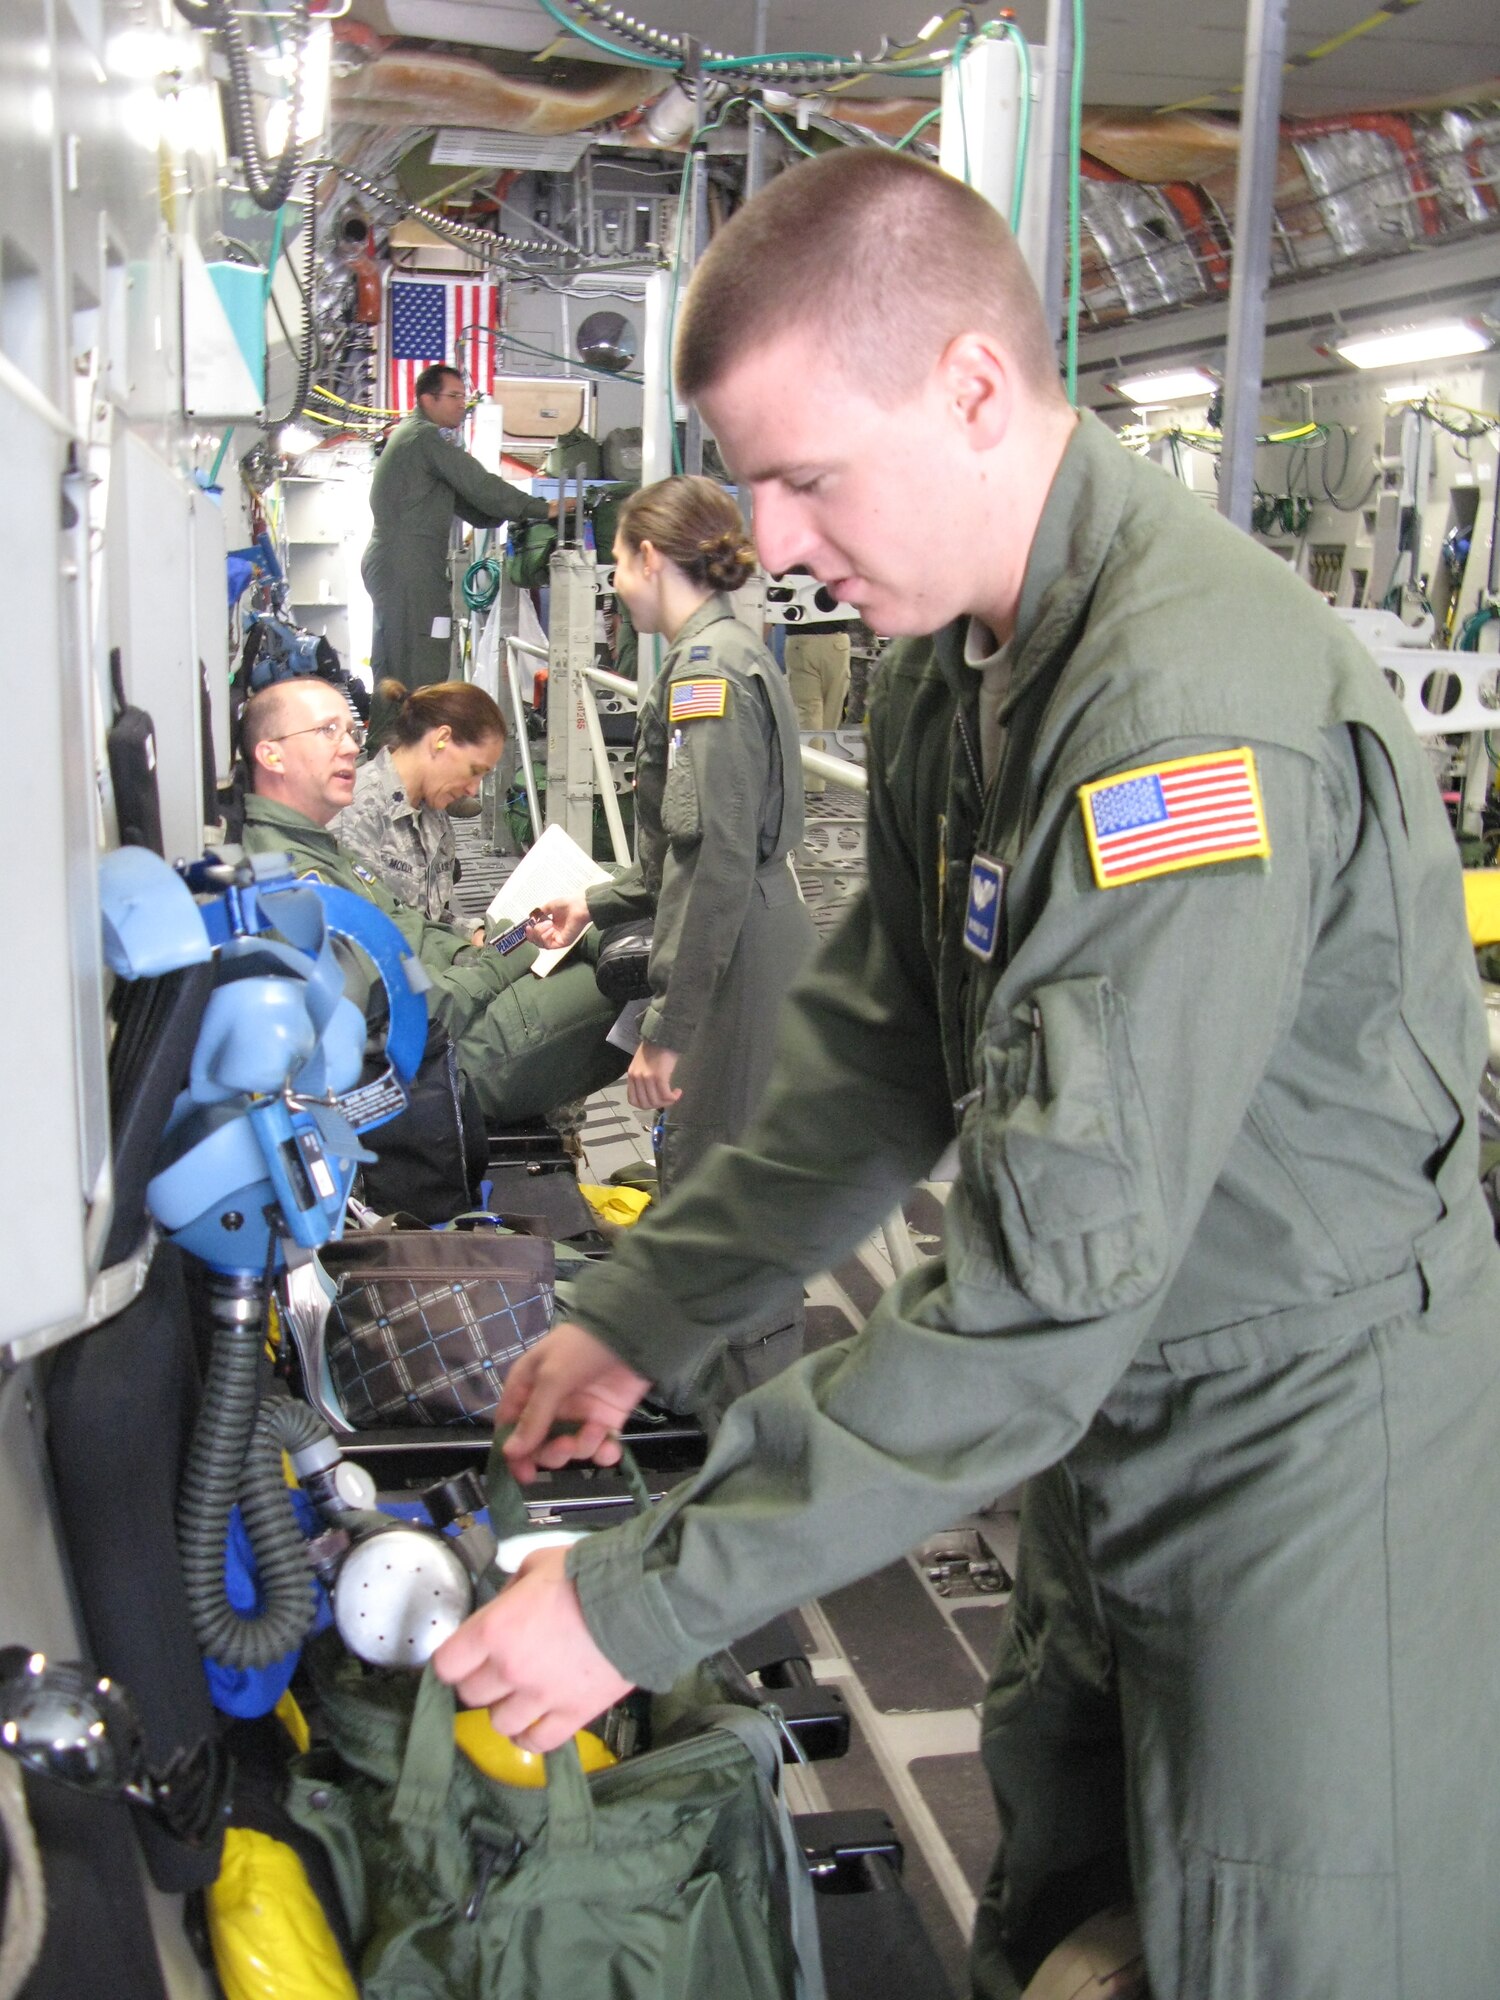 Senior Airman Brian Fox prepares ventilation equipment for an aeromedical evacuation flight from Ramstein Air Base, Germany, to Andrews Air Force, Md., April 26, 2011. (Defense Department photo/Donna Miles )